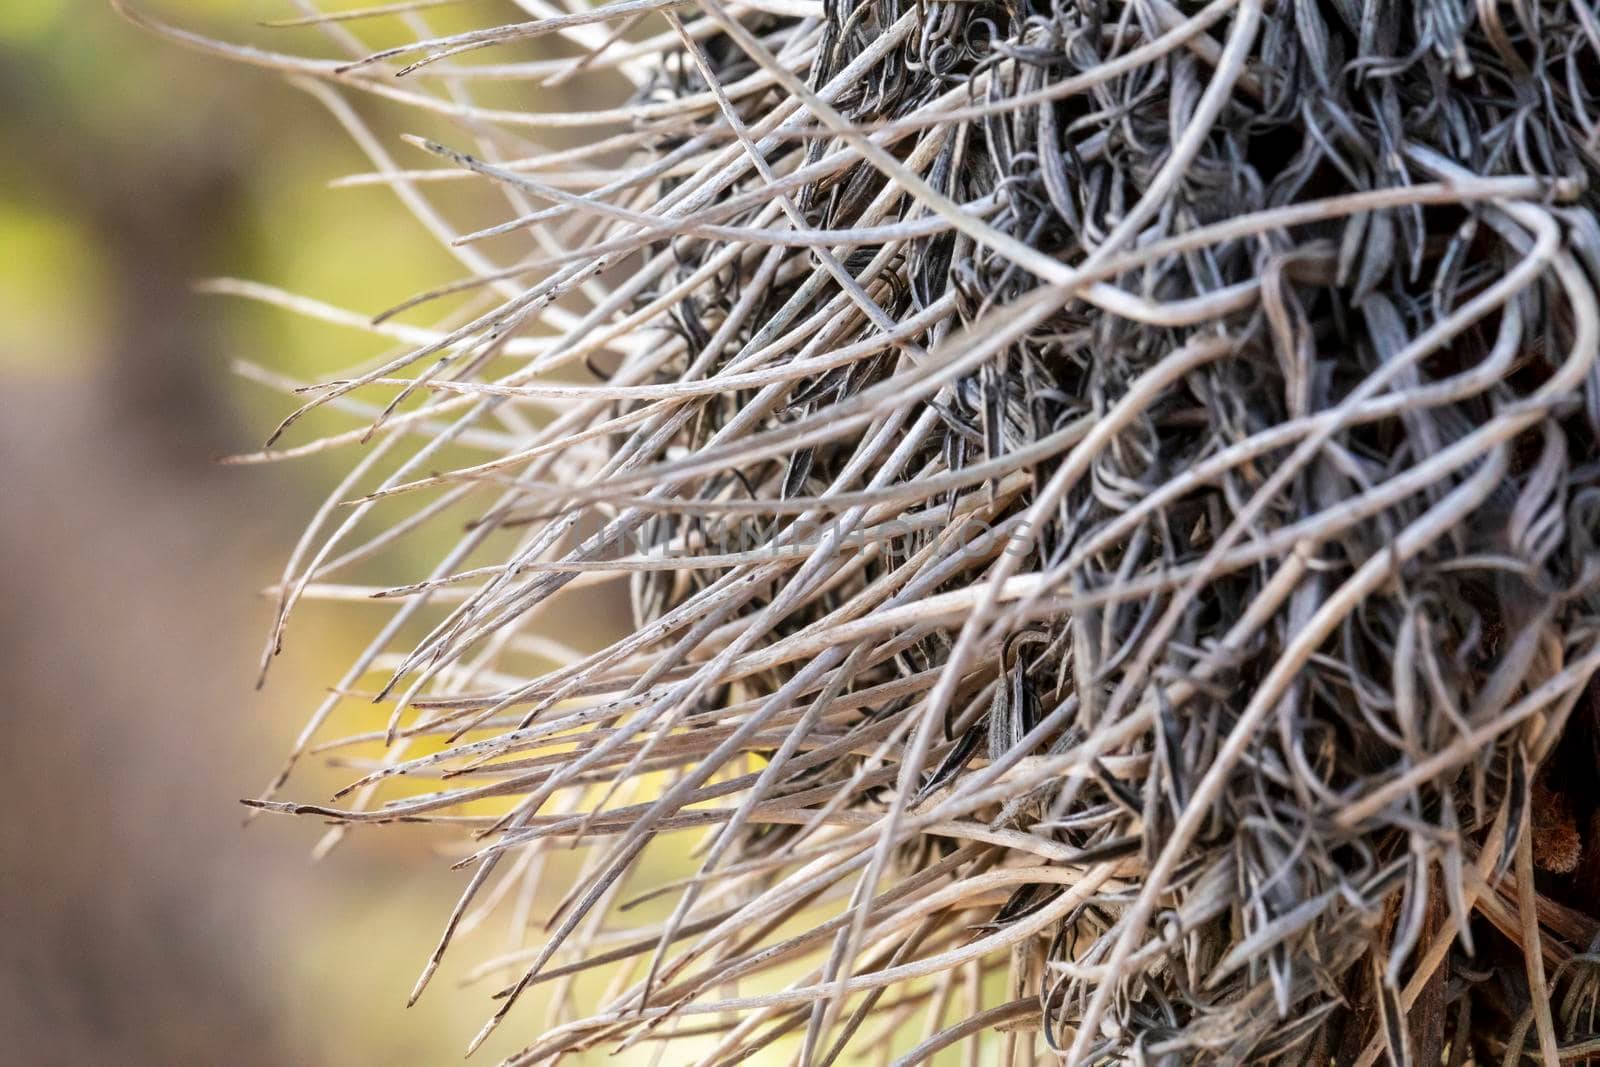 Photograph of a dead Banksia flower and plant due to bushfires in regional Australia